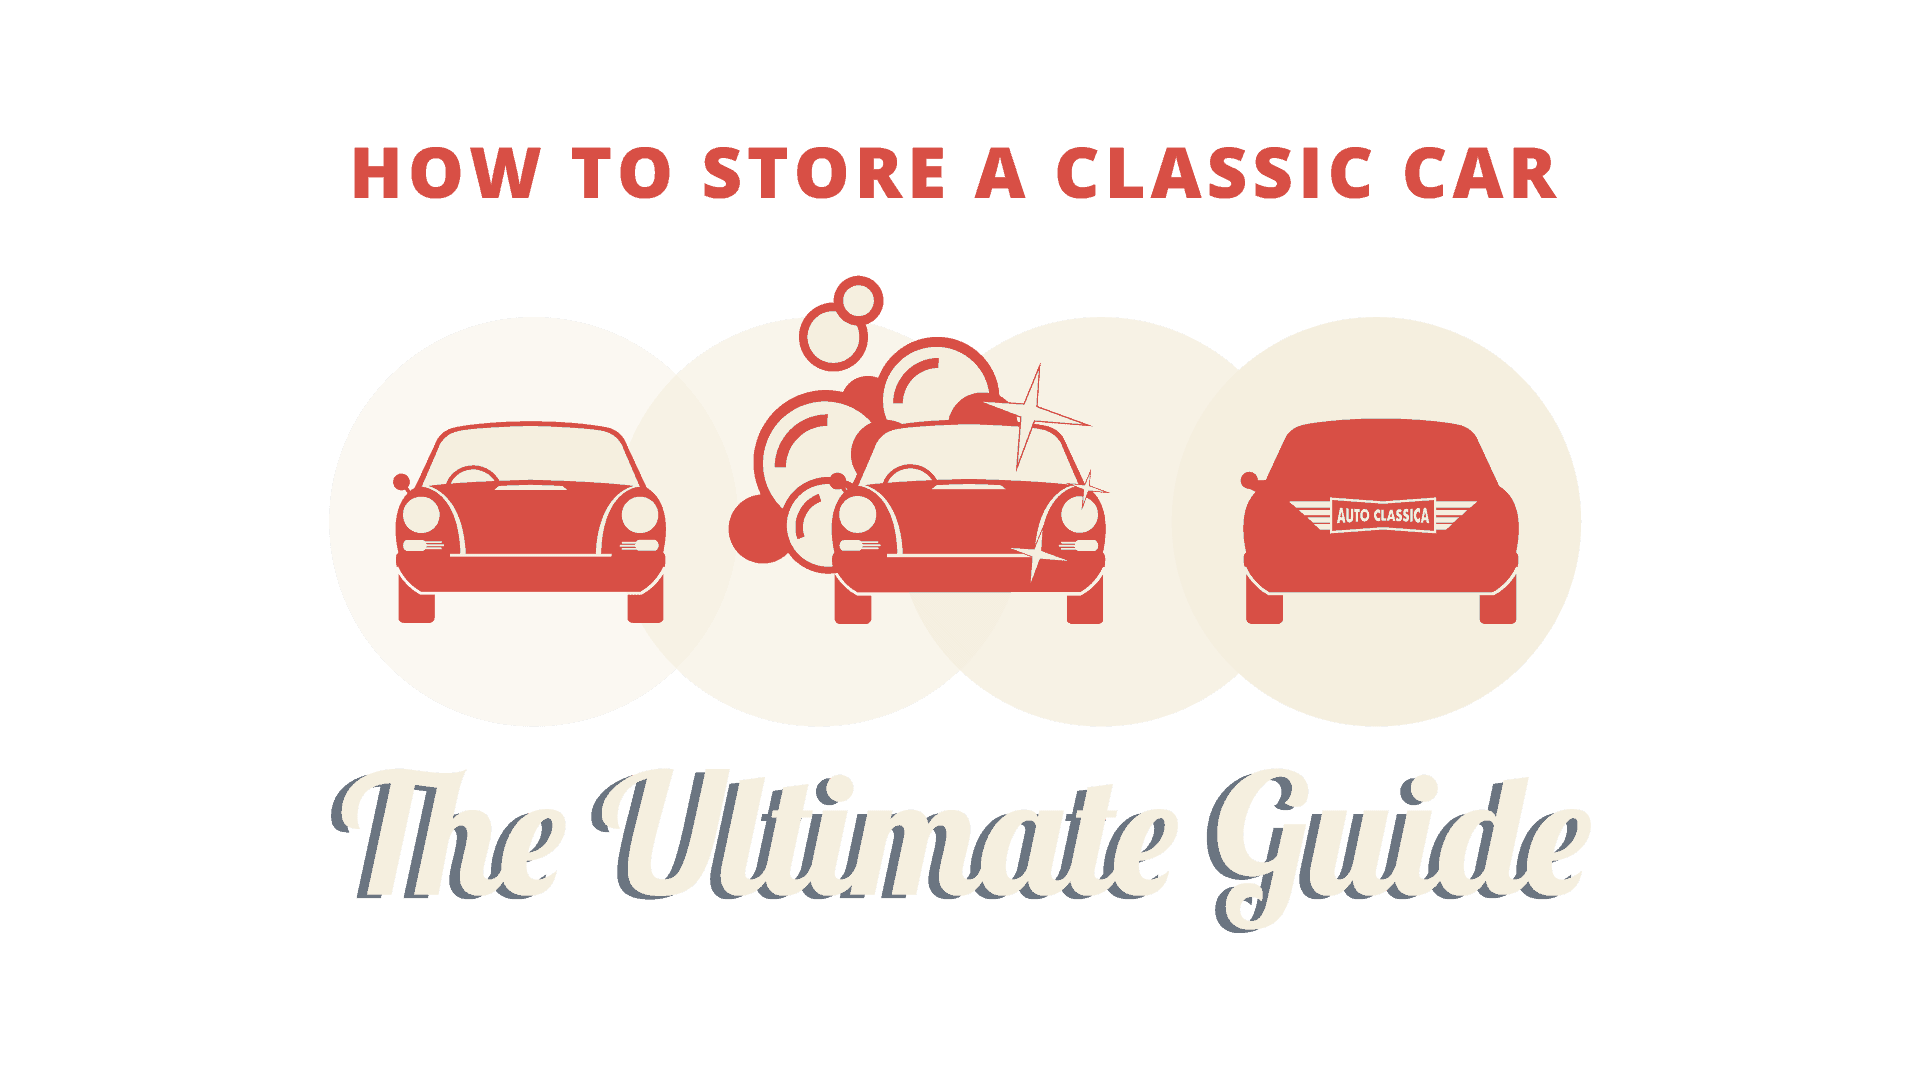 How to store a classic car